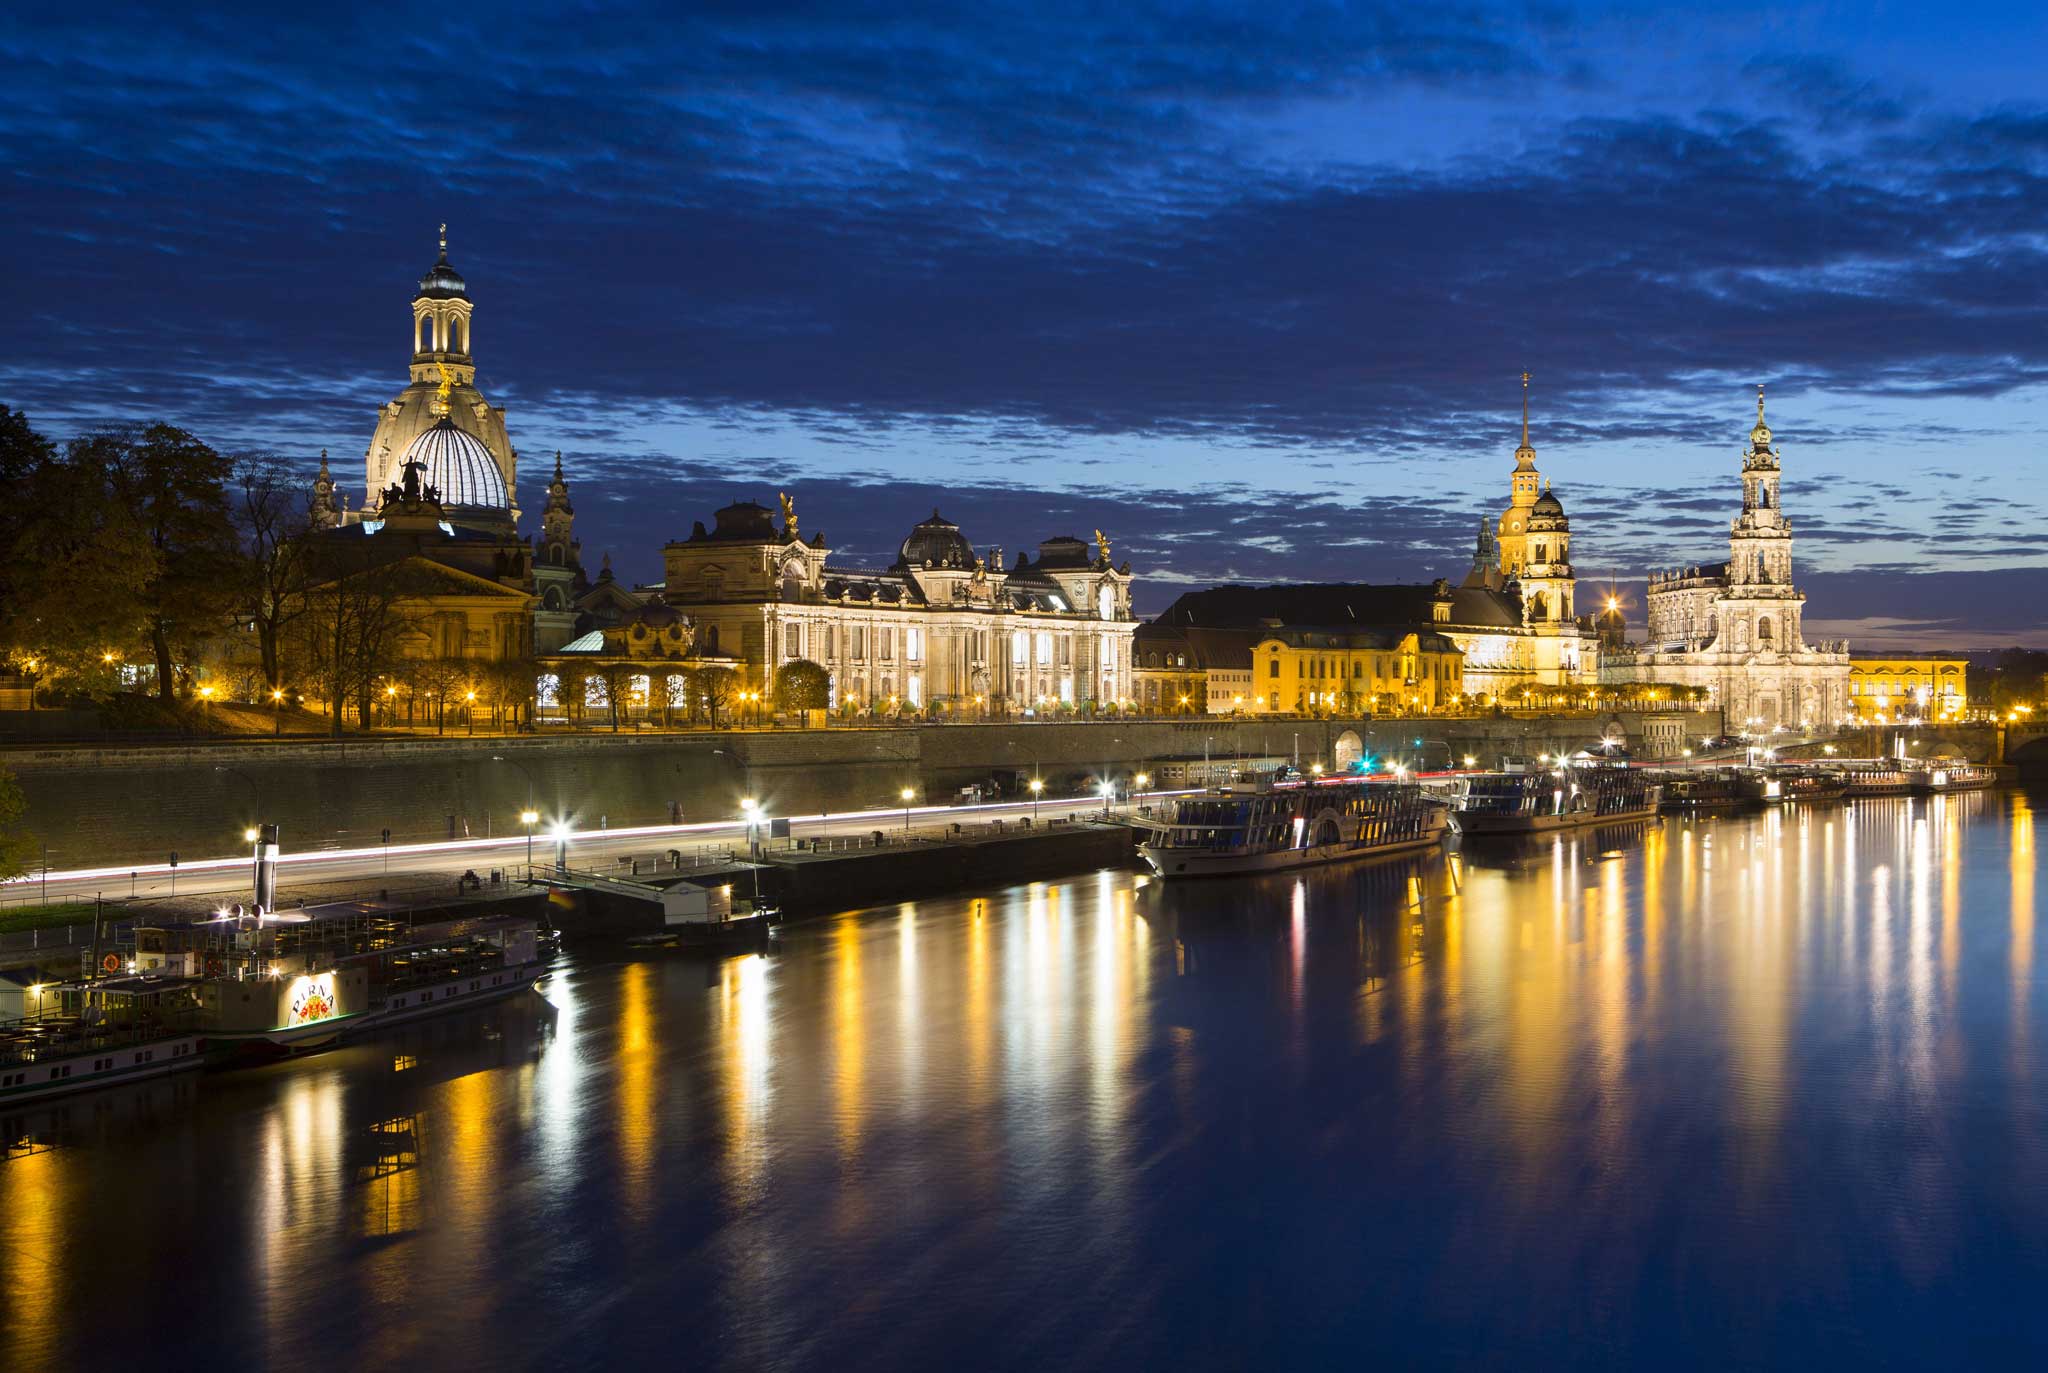 Which English city was twinned with Dresden in 1959 to mark their Second World War experiences?